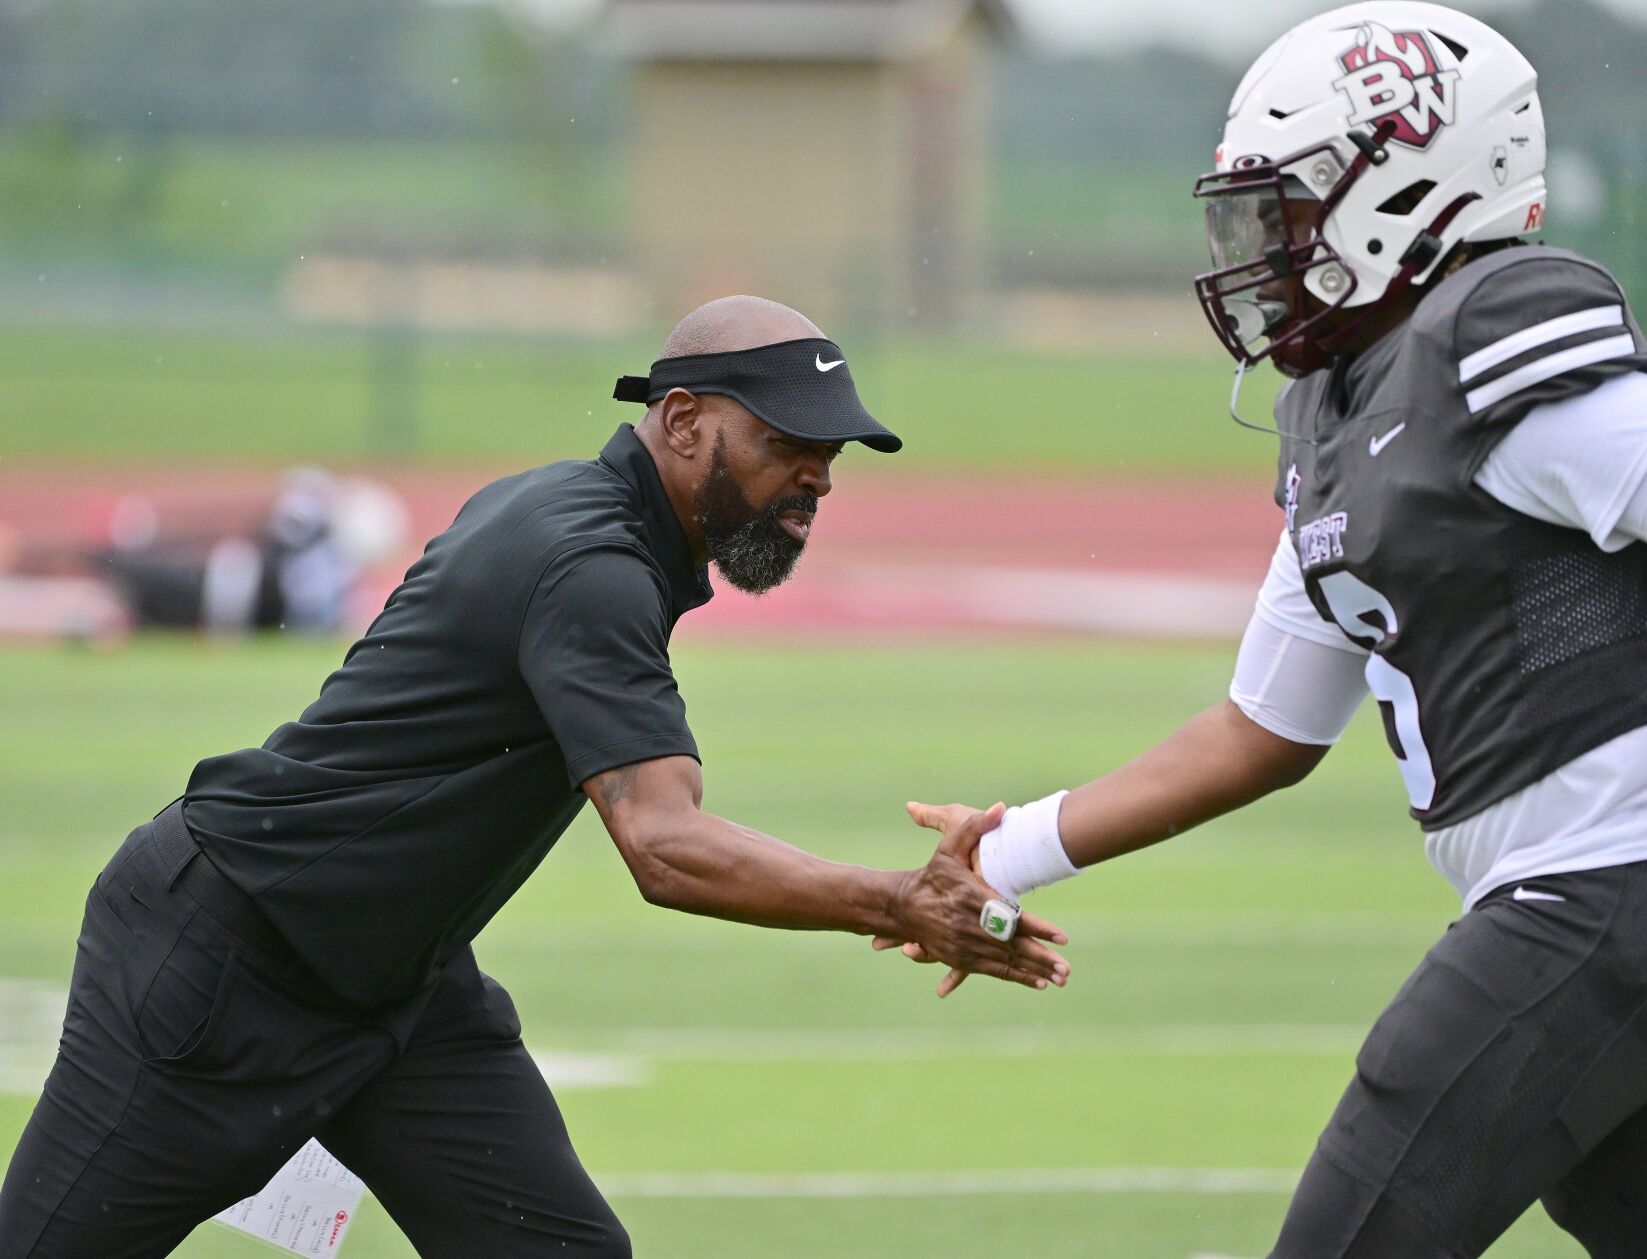 Belleville West Ends 18-Game Losing Streak with 33-28 Victory and Hopes for a Bright Future